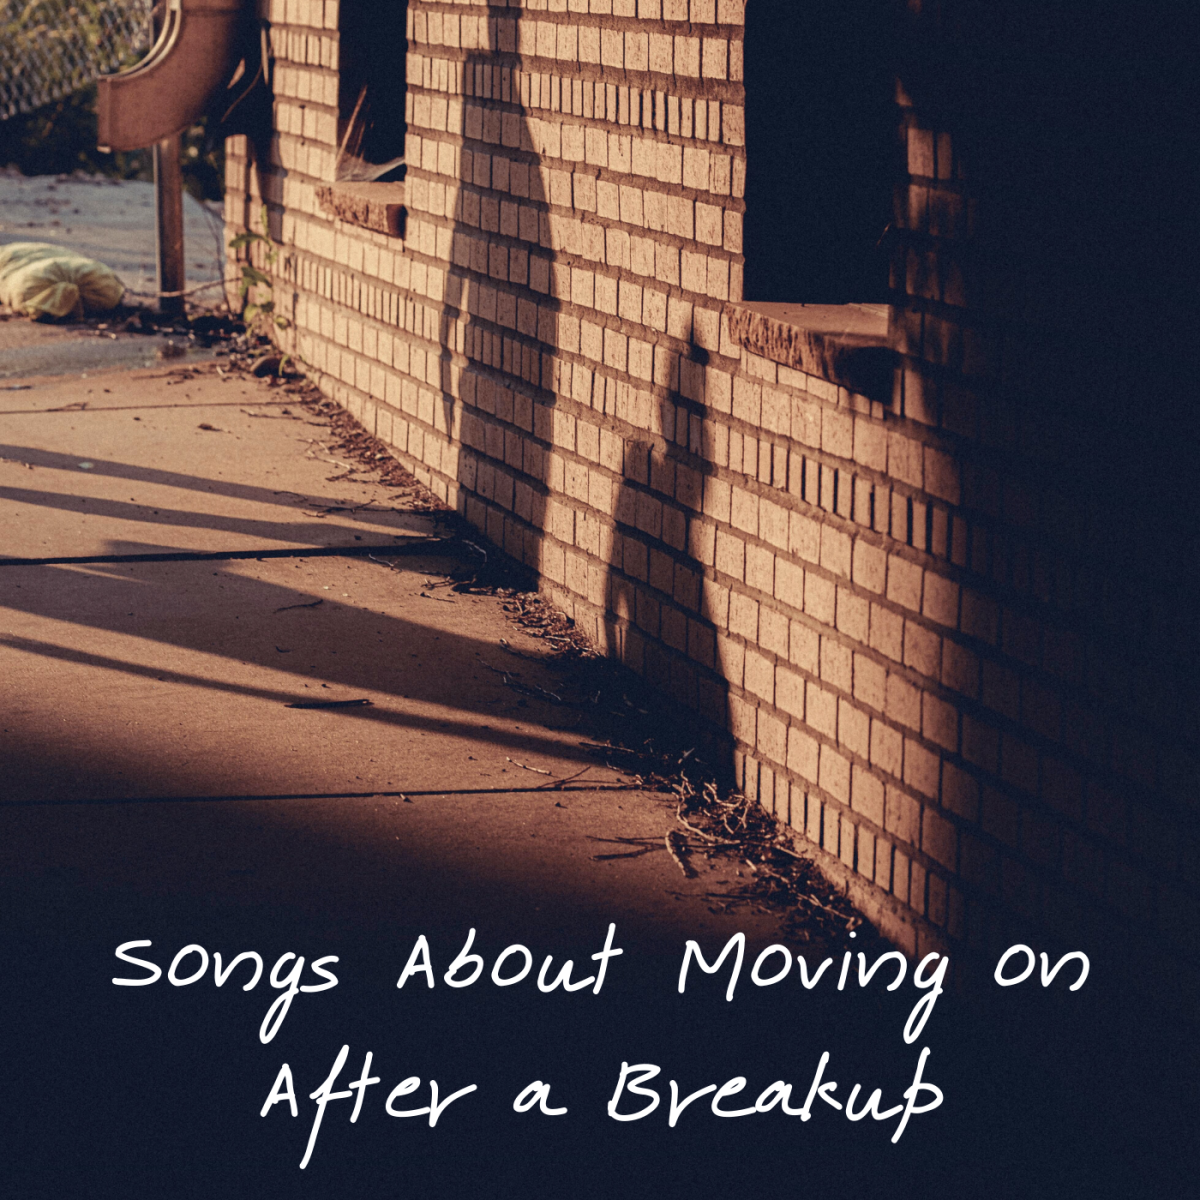 Top 5 Hit Songs About Breakups and Moving On